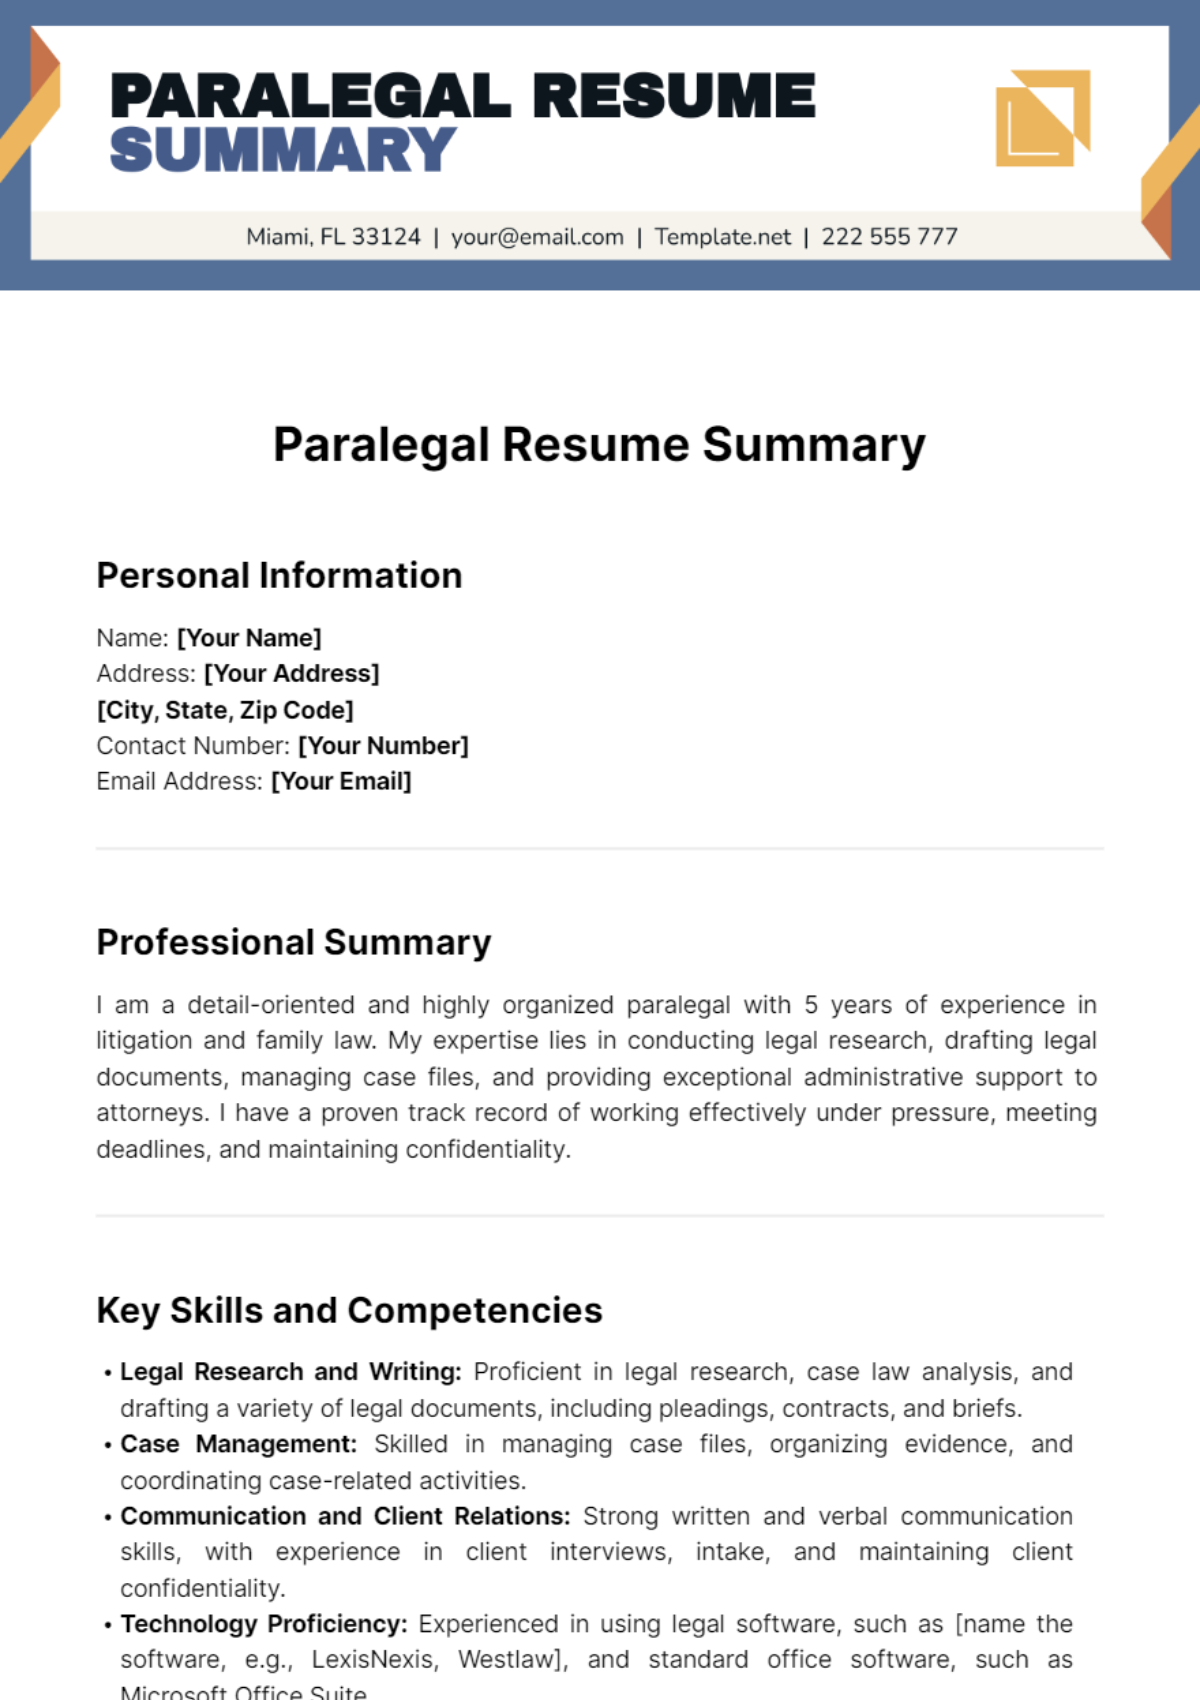 Paralegal Resume Summary Template